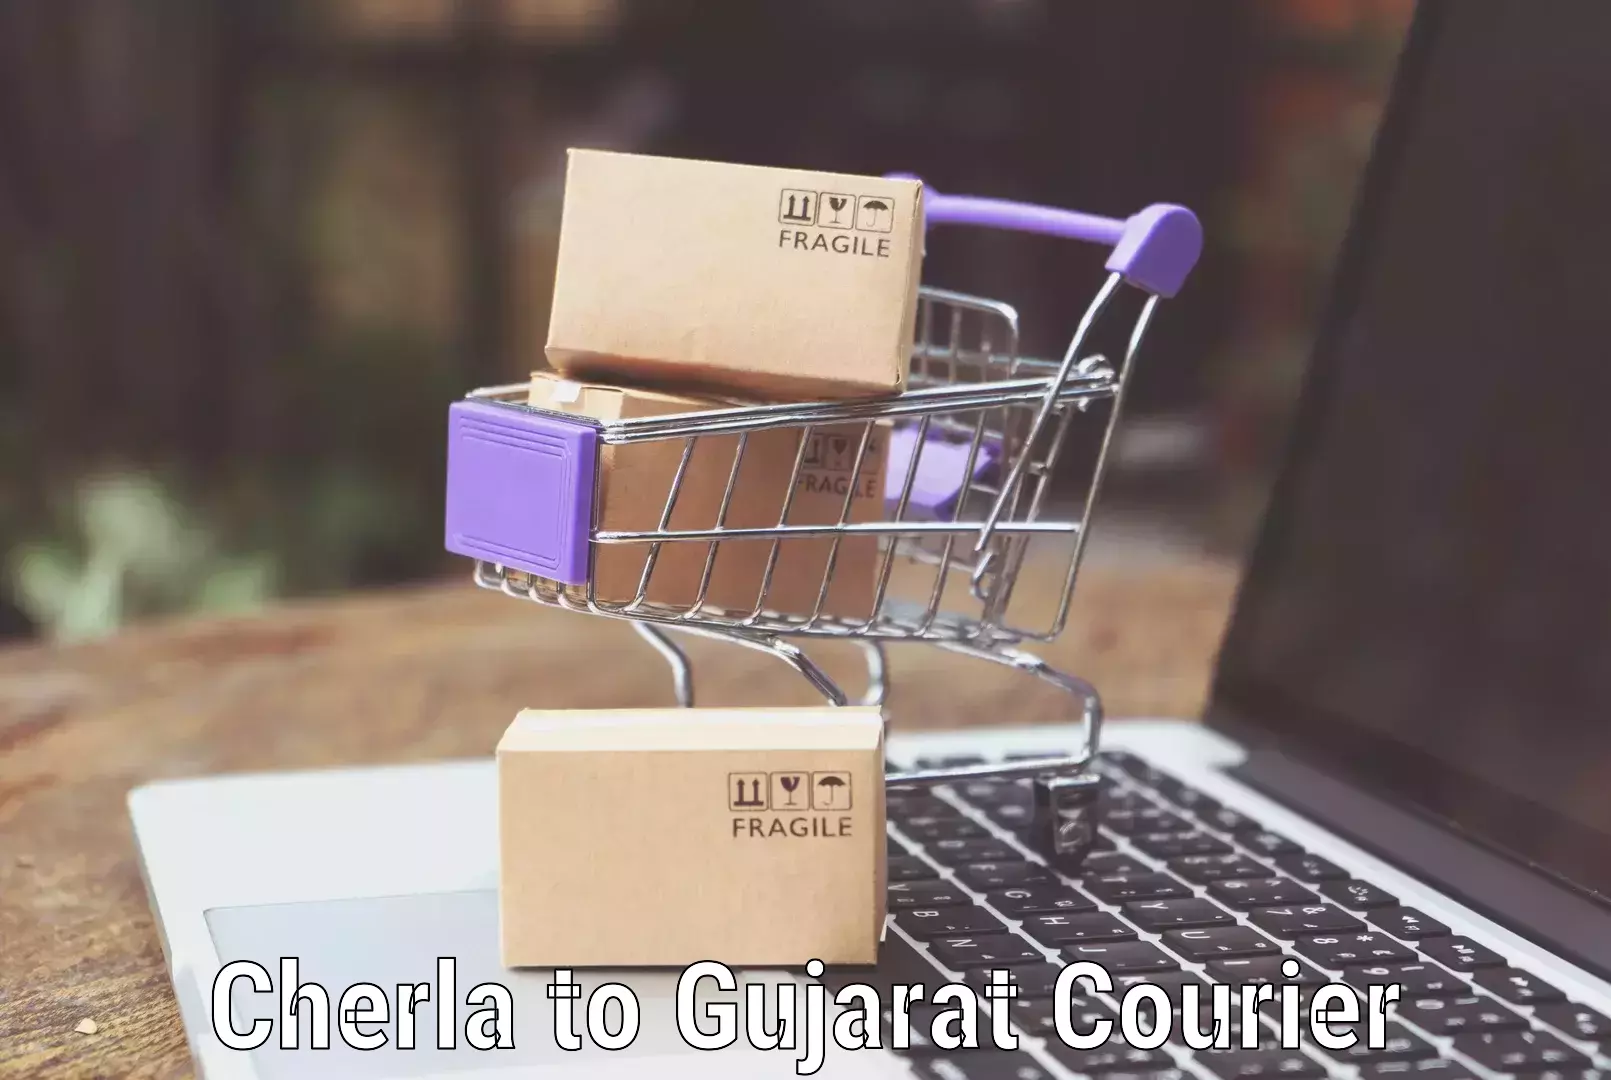 Hassle-free luggage shipping in Cherla to Ahmedabad